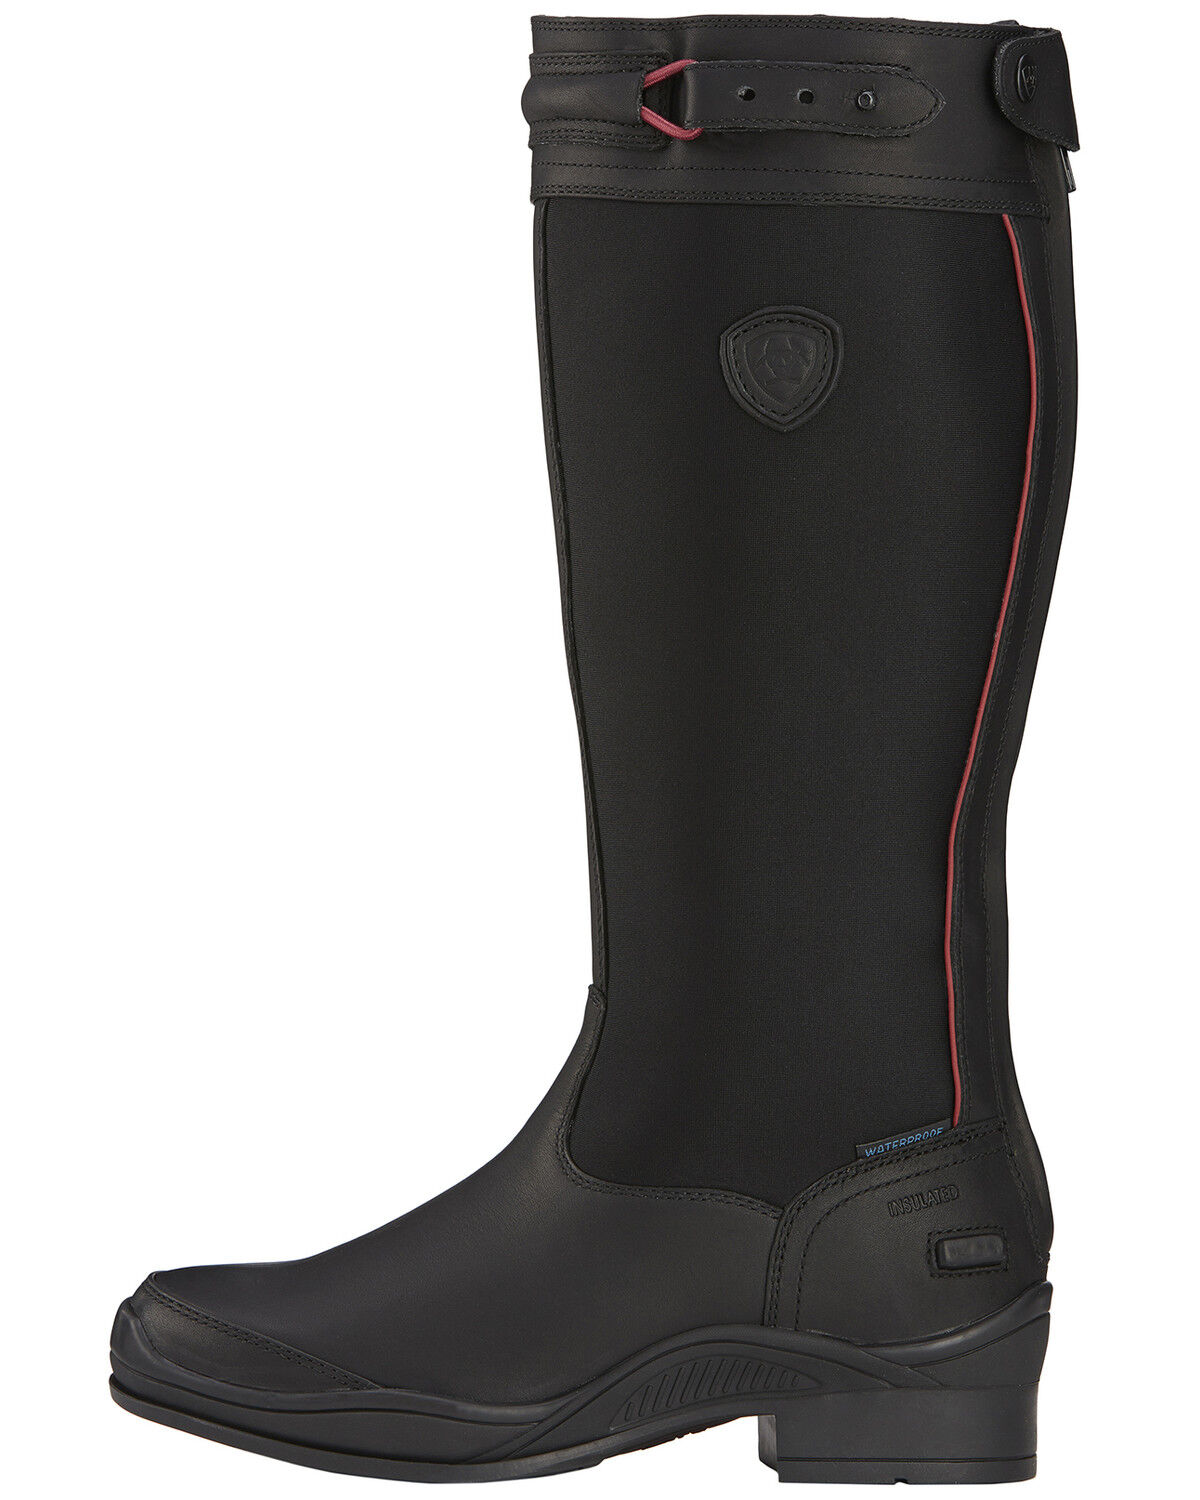 ariat womens riding boots